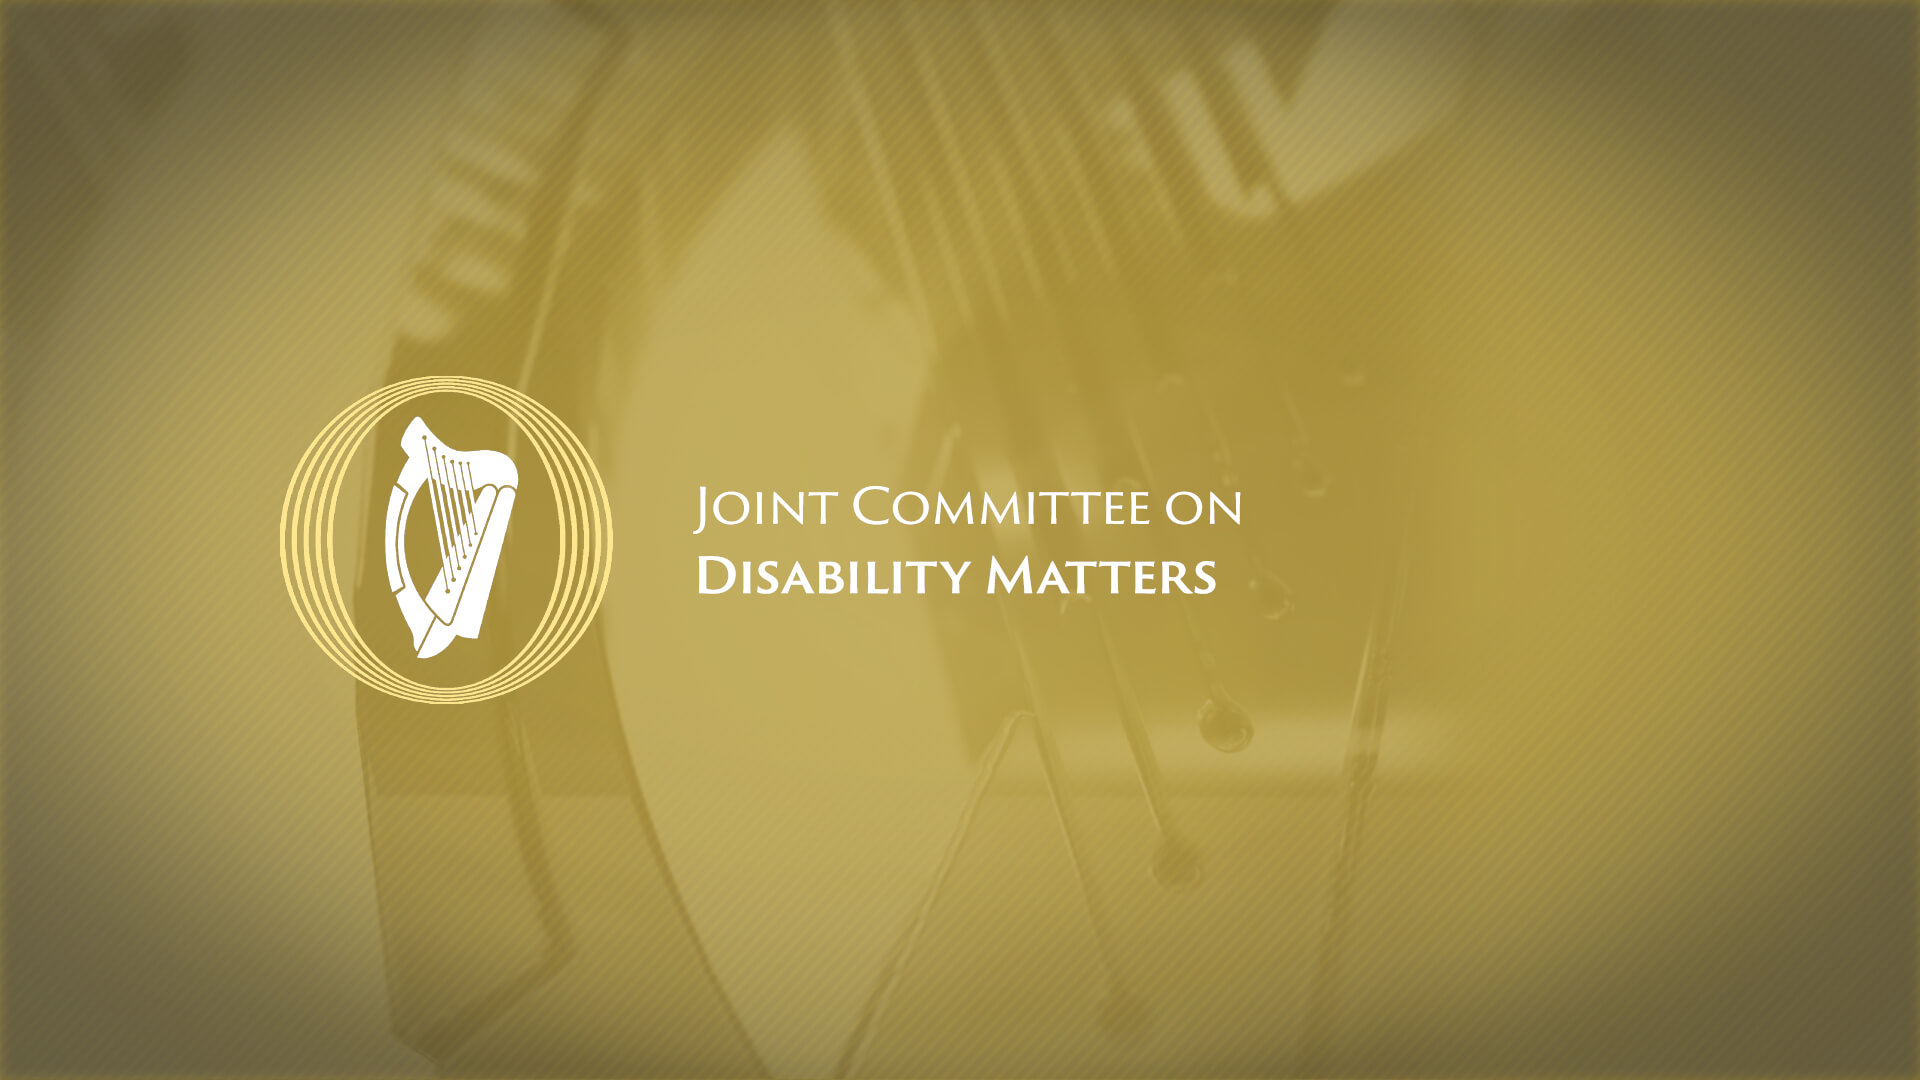 Joint Committee on Disability Matters with ISL Interpretation